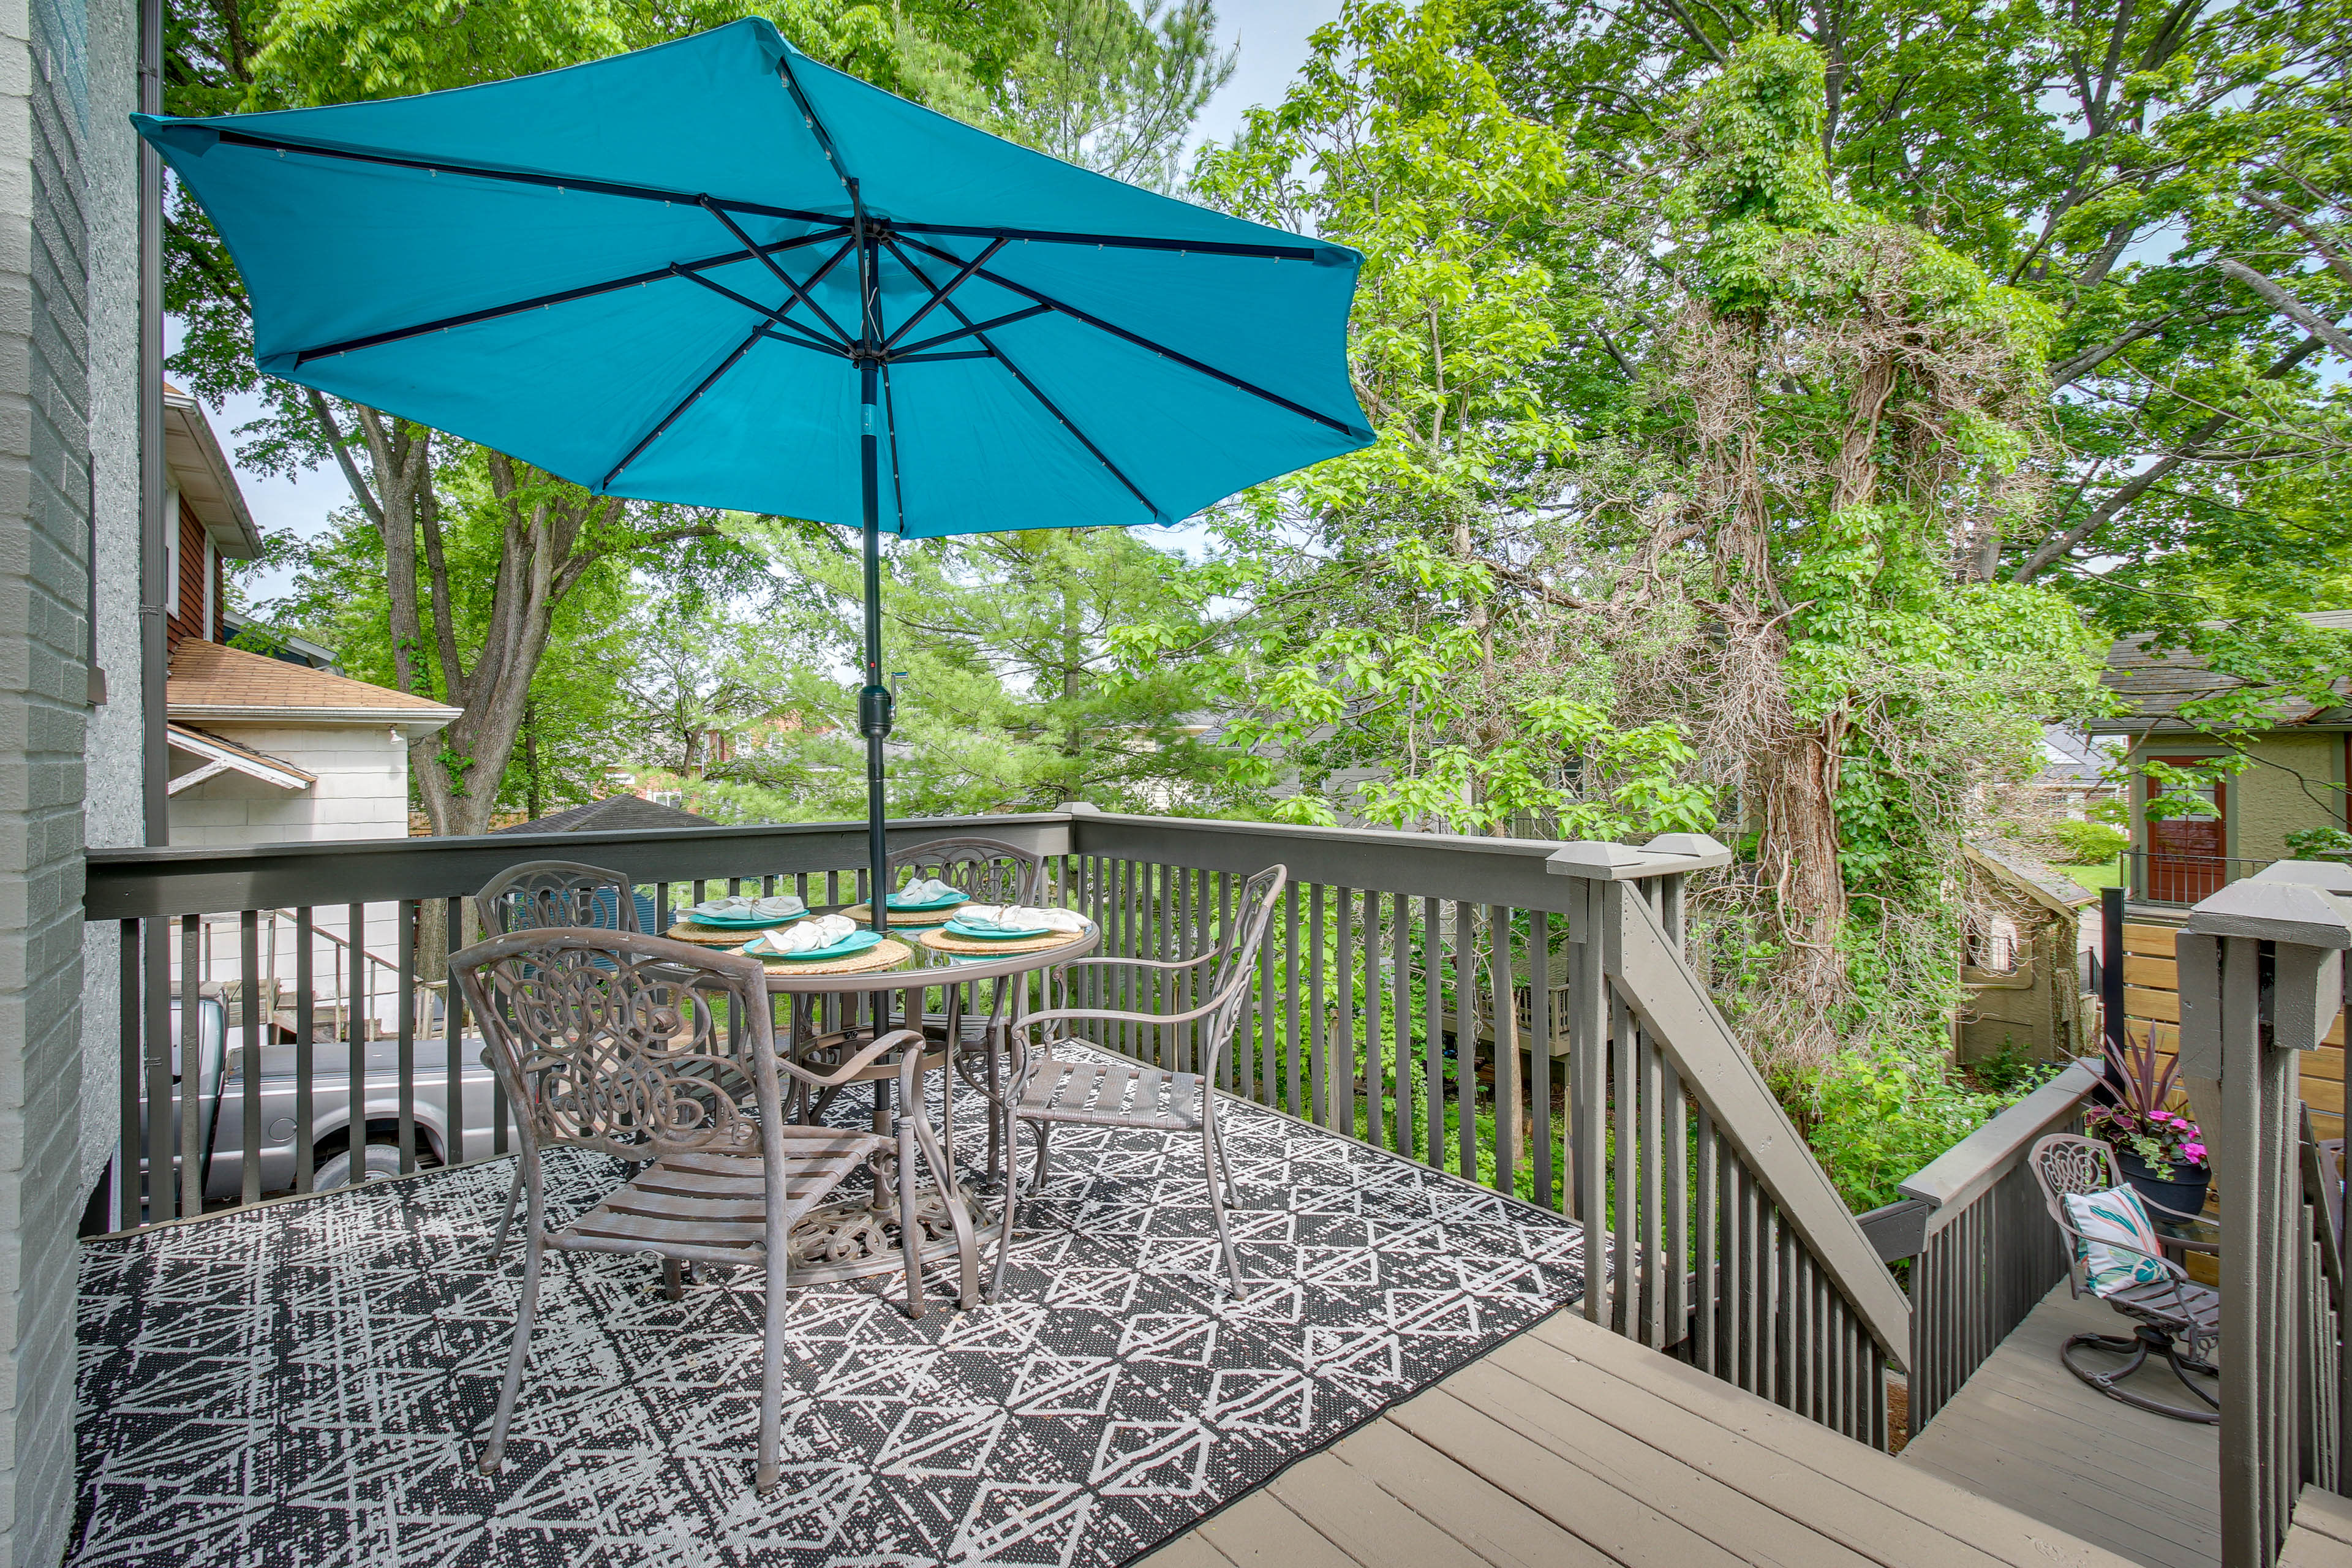 Deck | Outdoor Dining Area | Gas Grill